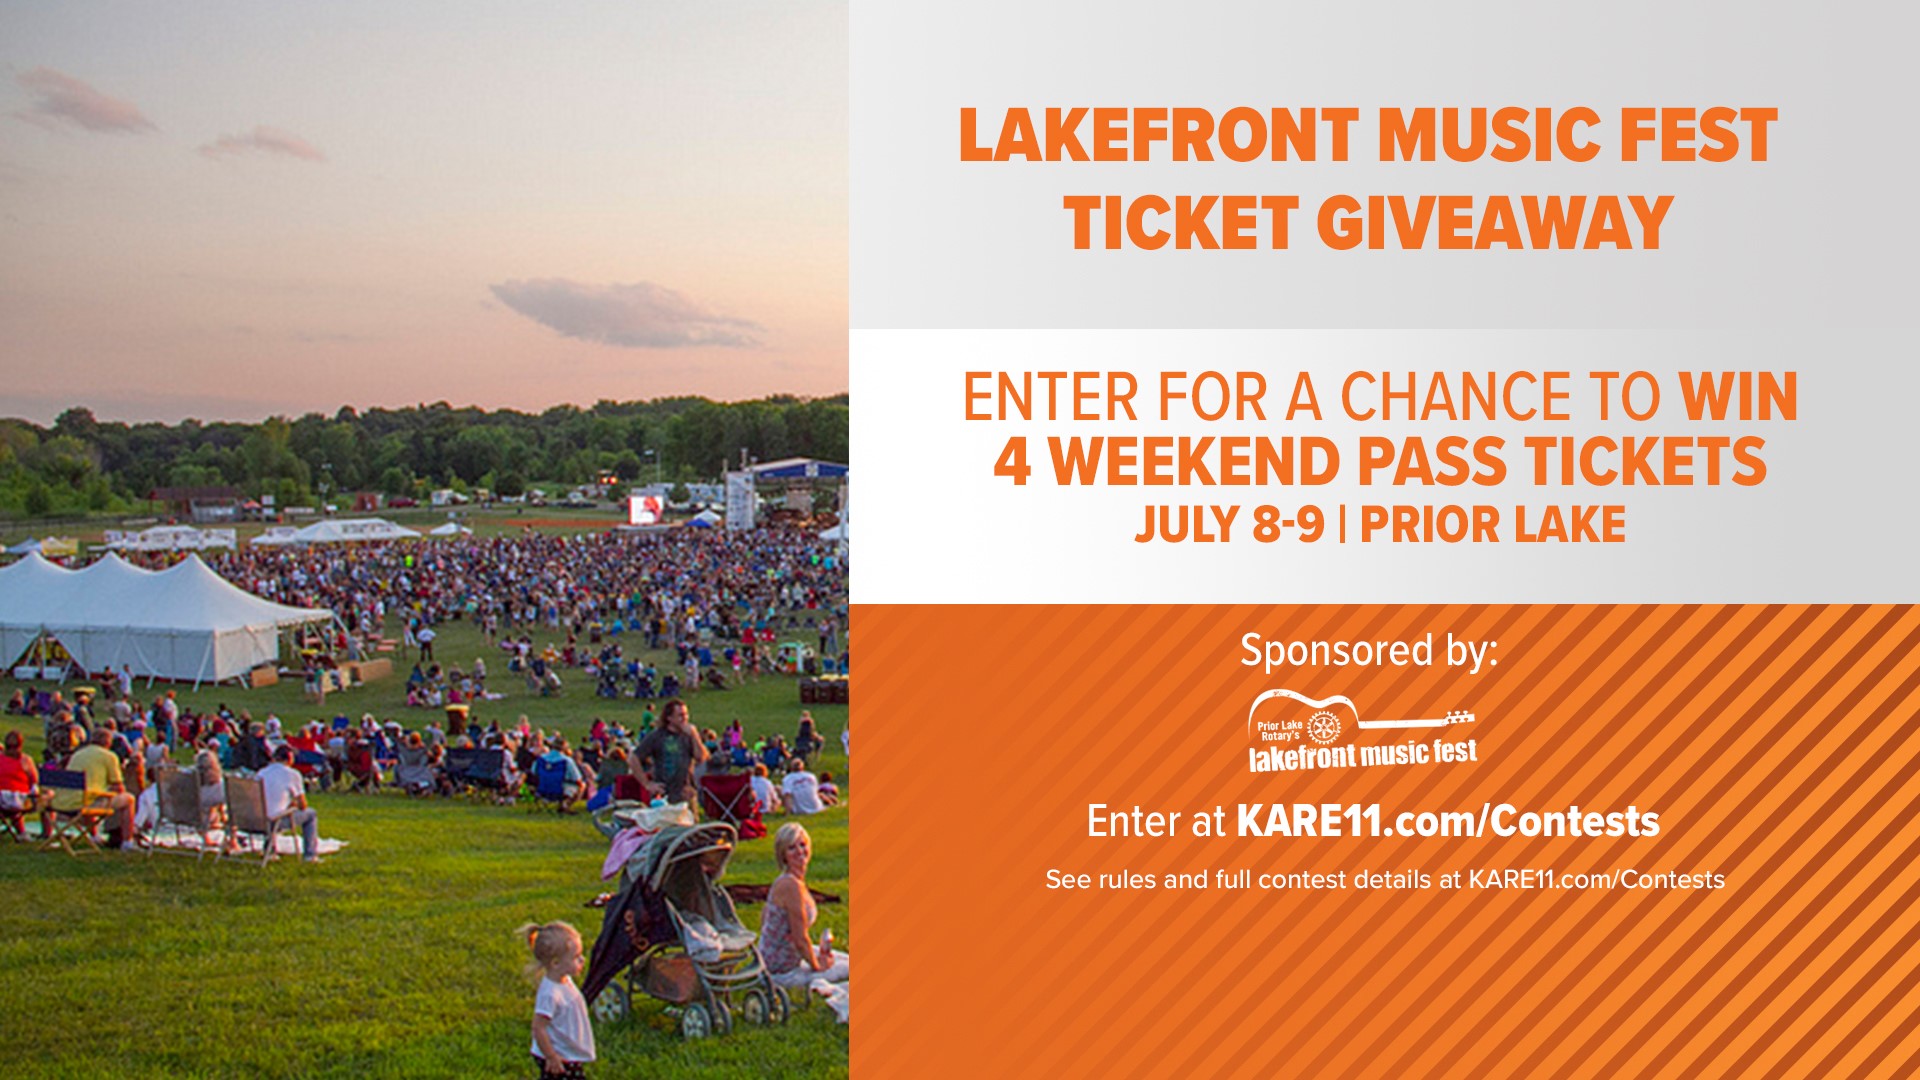 Lakefront Music Fest Ticket Giveaway Contest